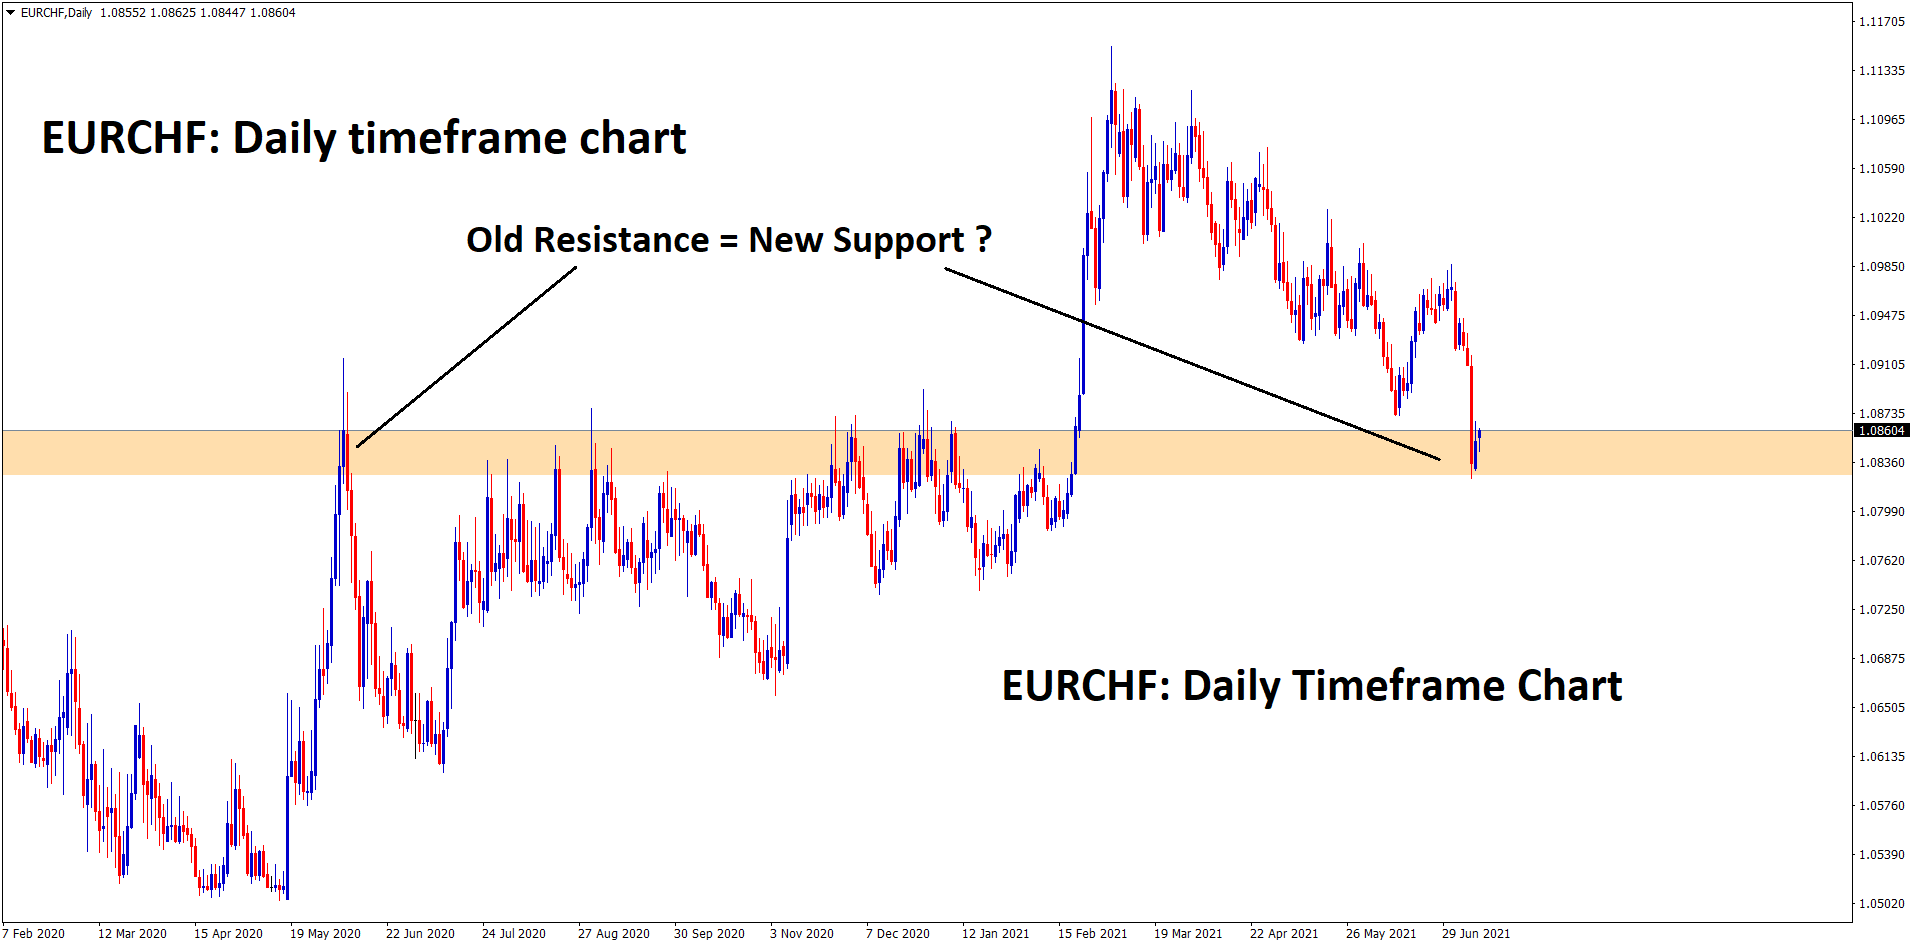 Old resistance converted into new support zone Wait for the bounce back to confirm it.